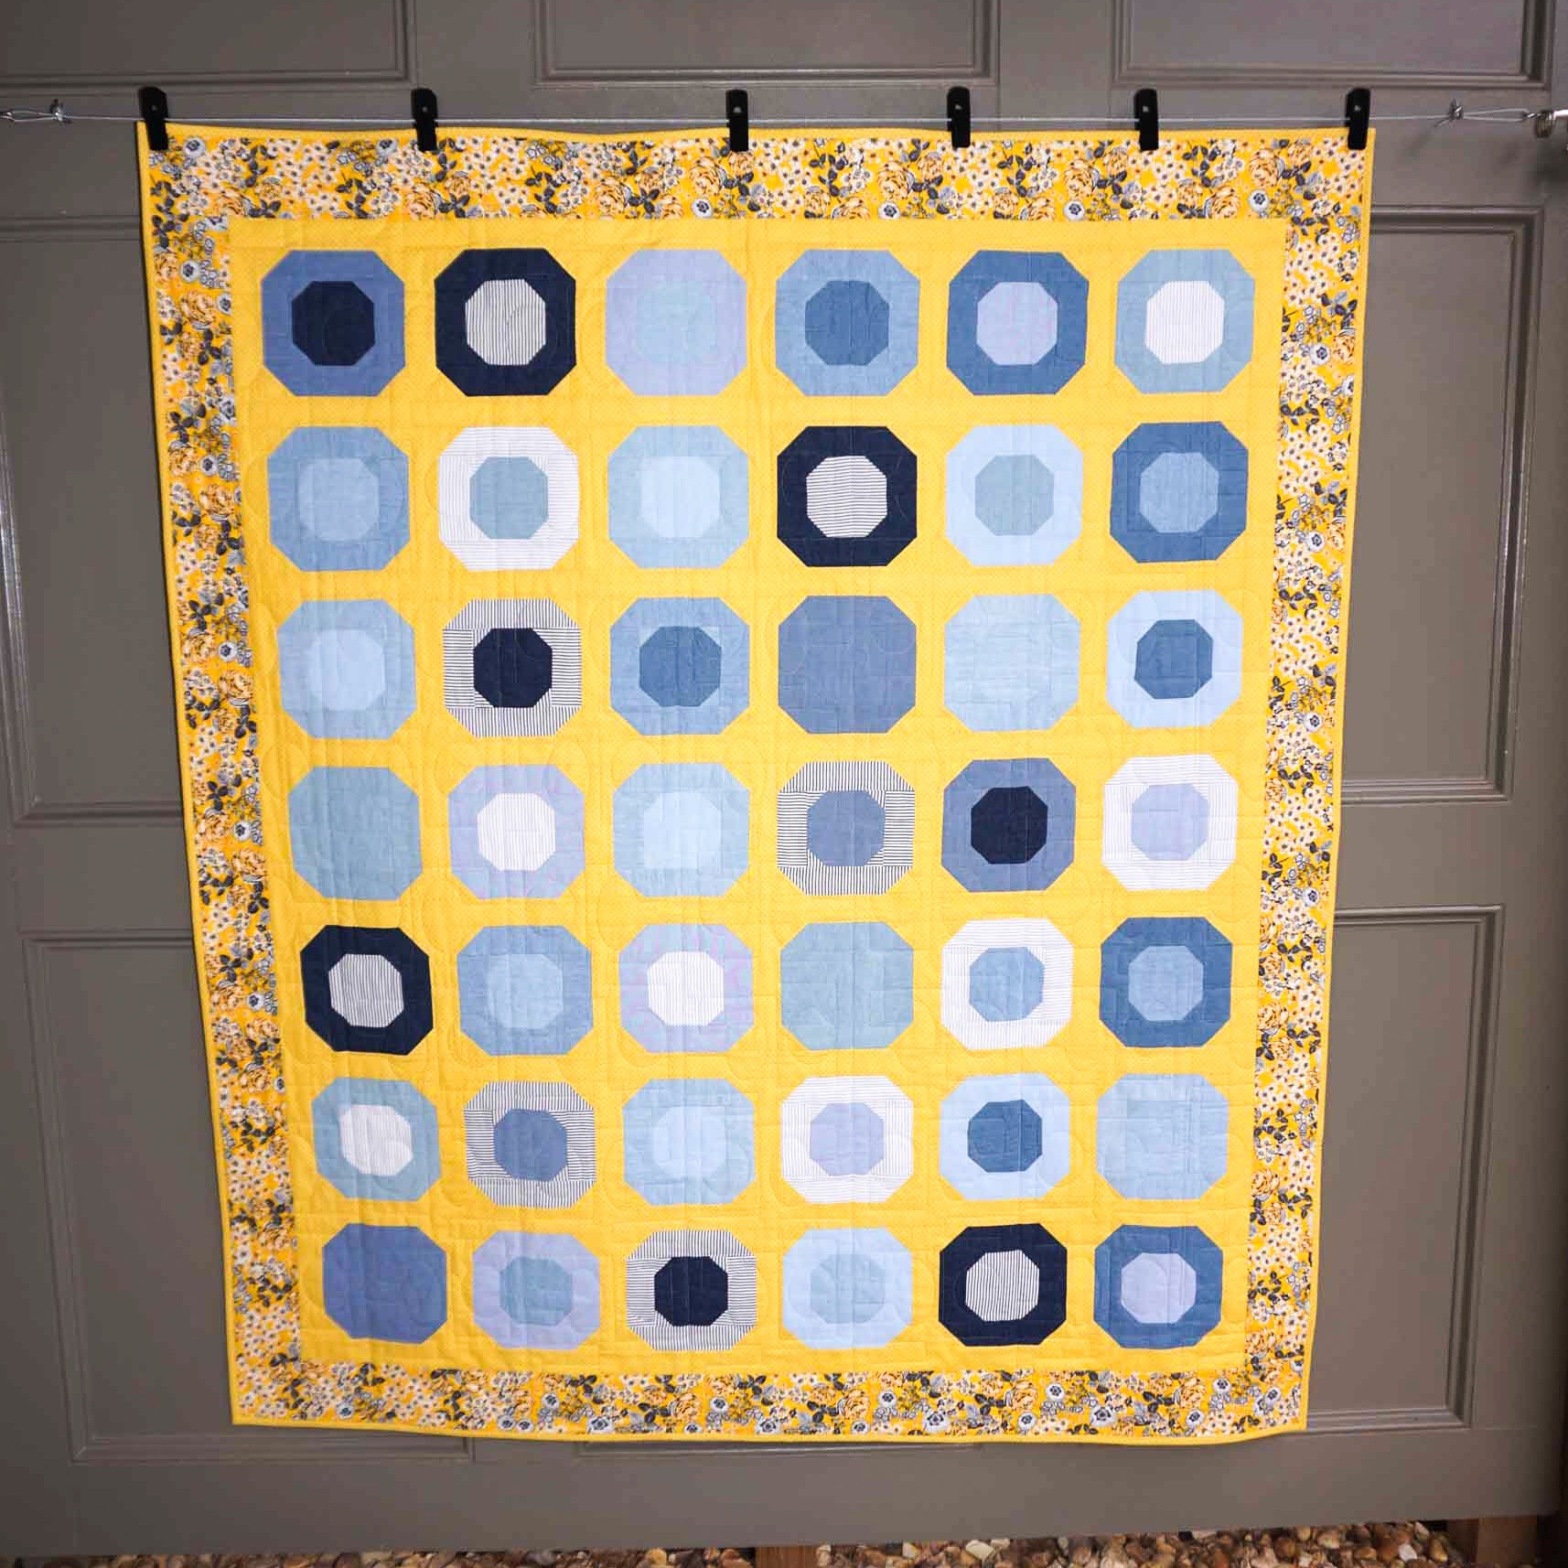 Memorial Memory Quilt using Dottie pattern by Allison R. Harris of Cluck Cluck Sew